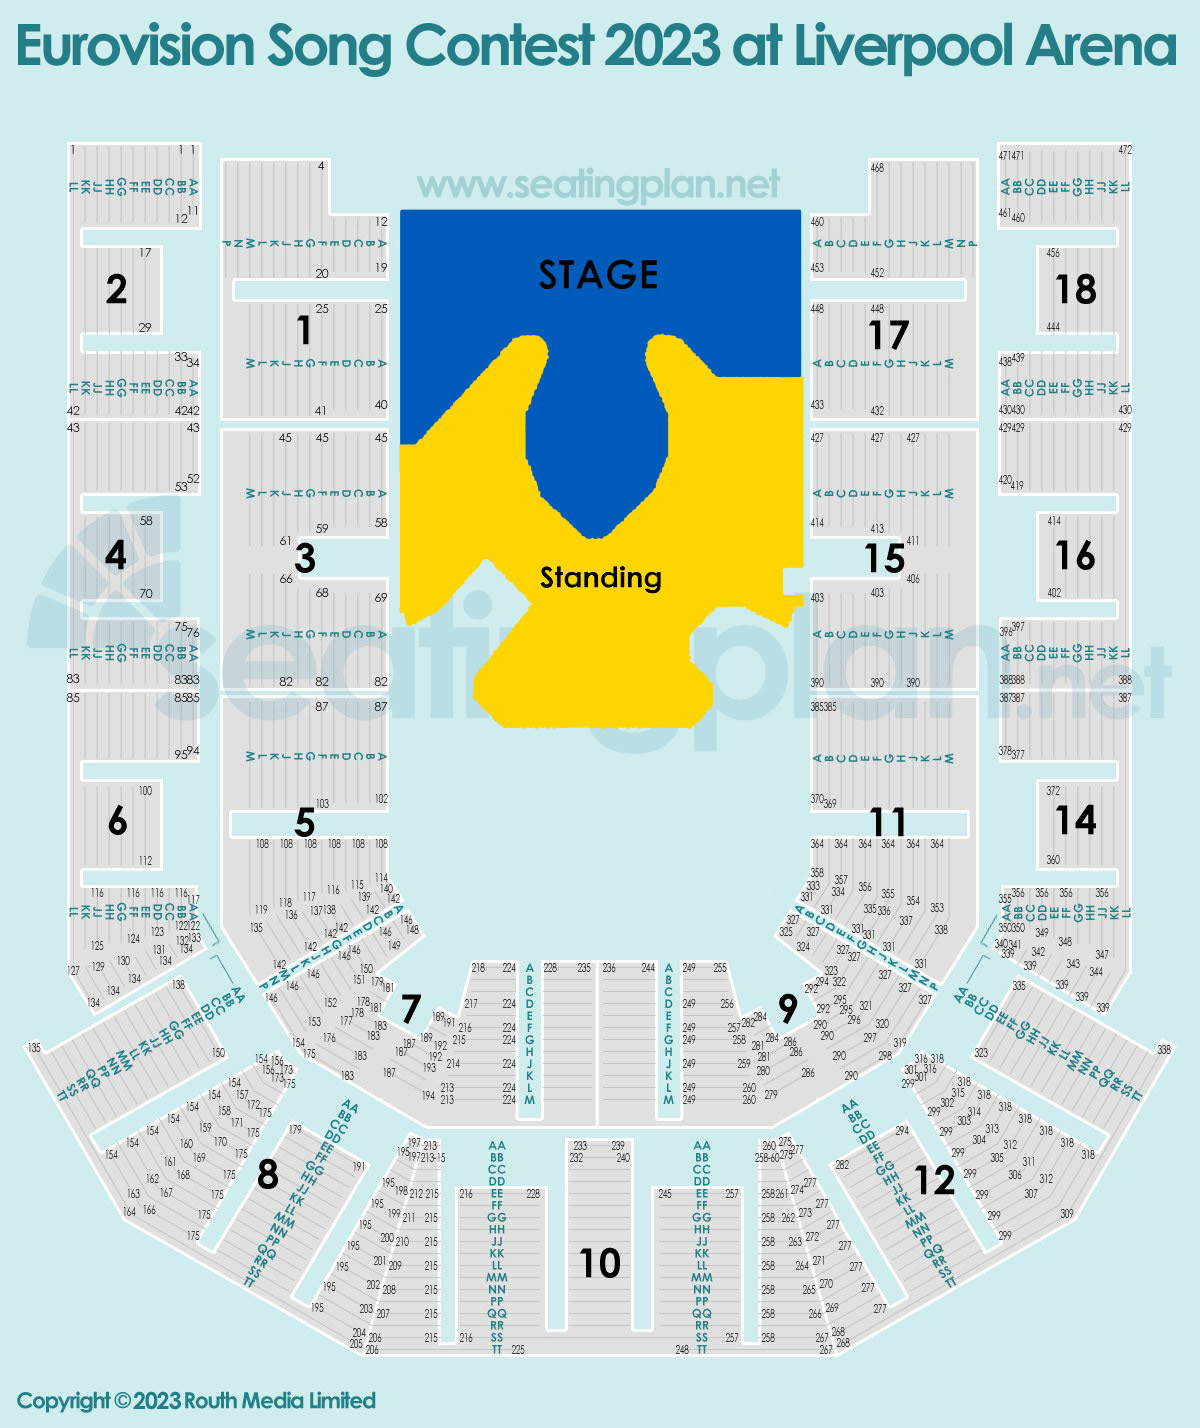 detailed Seating Plan at Liverpool Arena host of the Eurovision Song Contest 2023